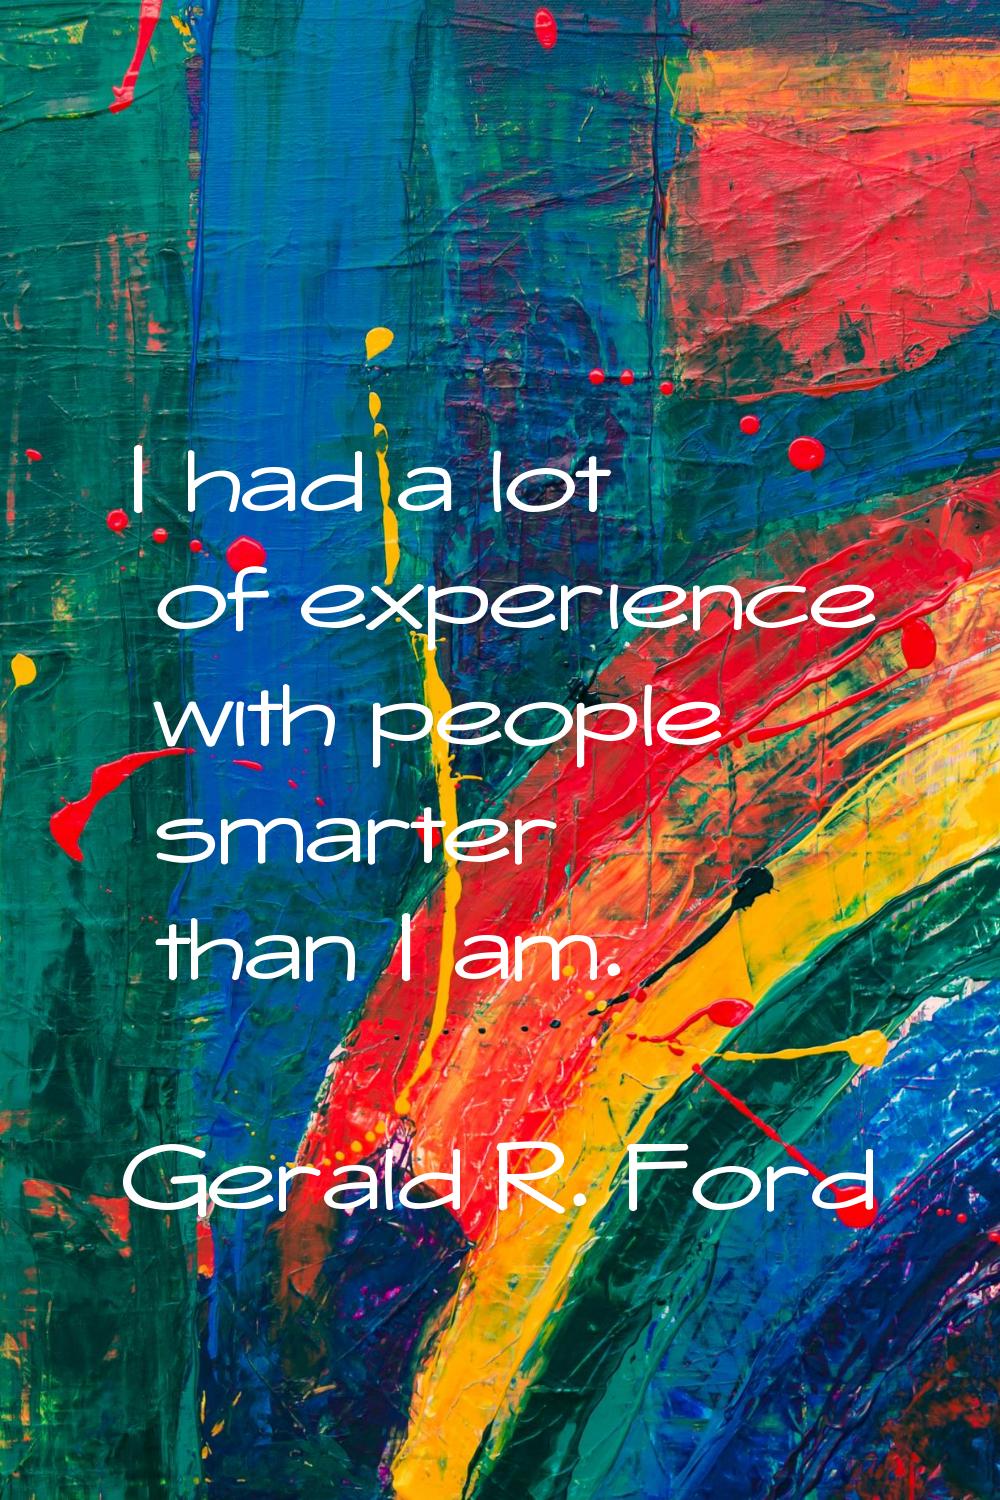 I had a lot of experience with people smarter than I am.